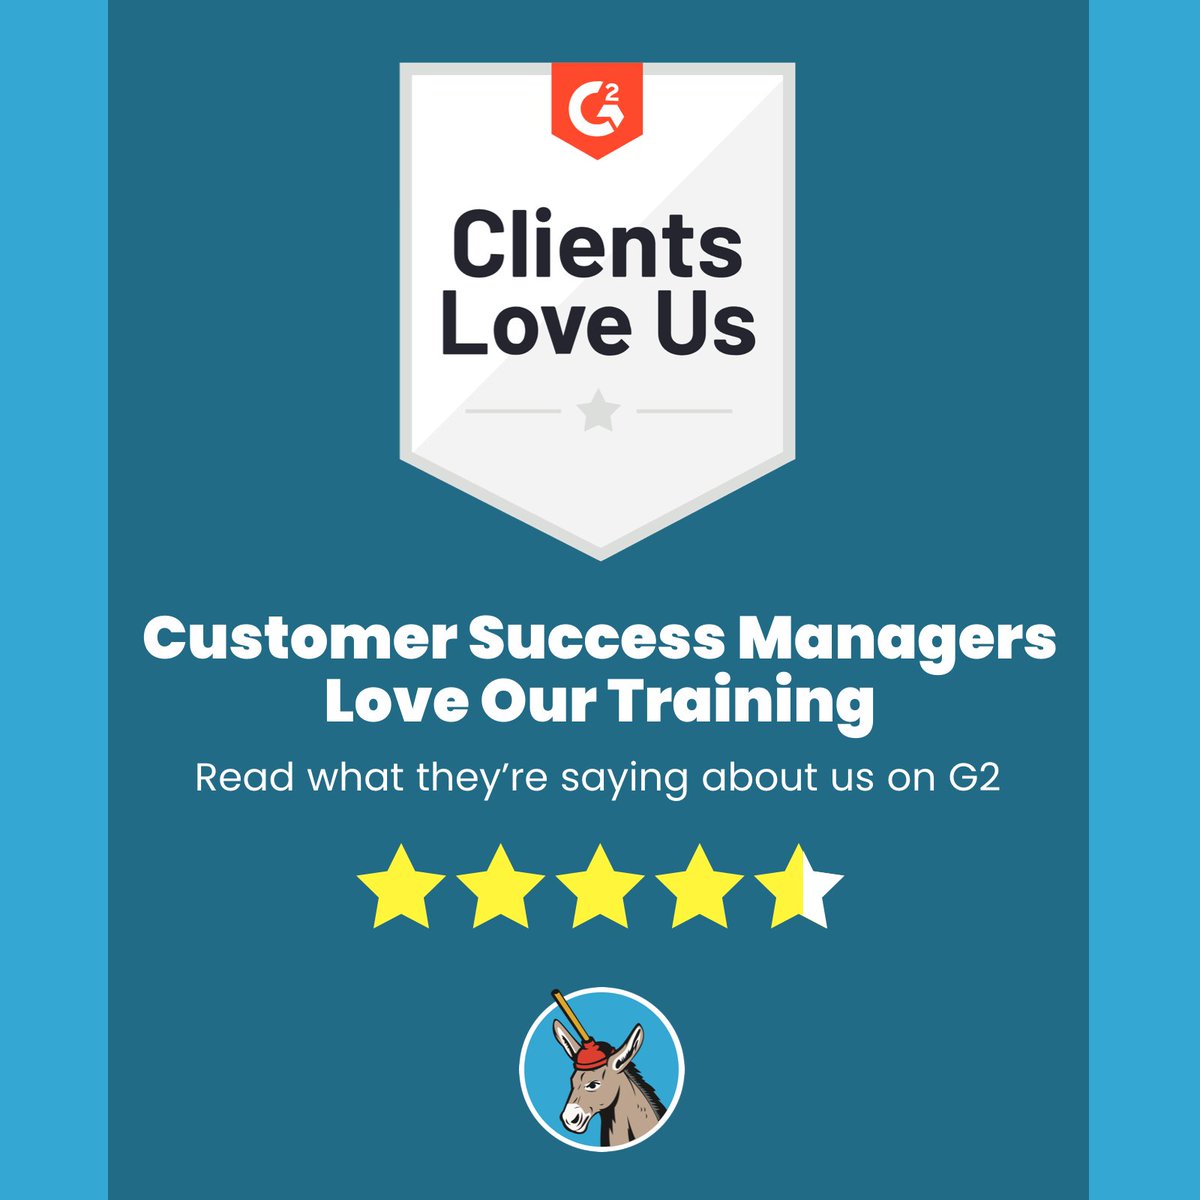 Hear from over 800 Customer Success pros on how our programs have helped their CS practice and their careers. Read what they have to say about us on G2: successcoa.ch/46QnnBv

#customersuccess #customersuccessmanager #successcoaching #G2